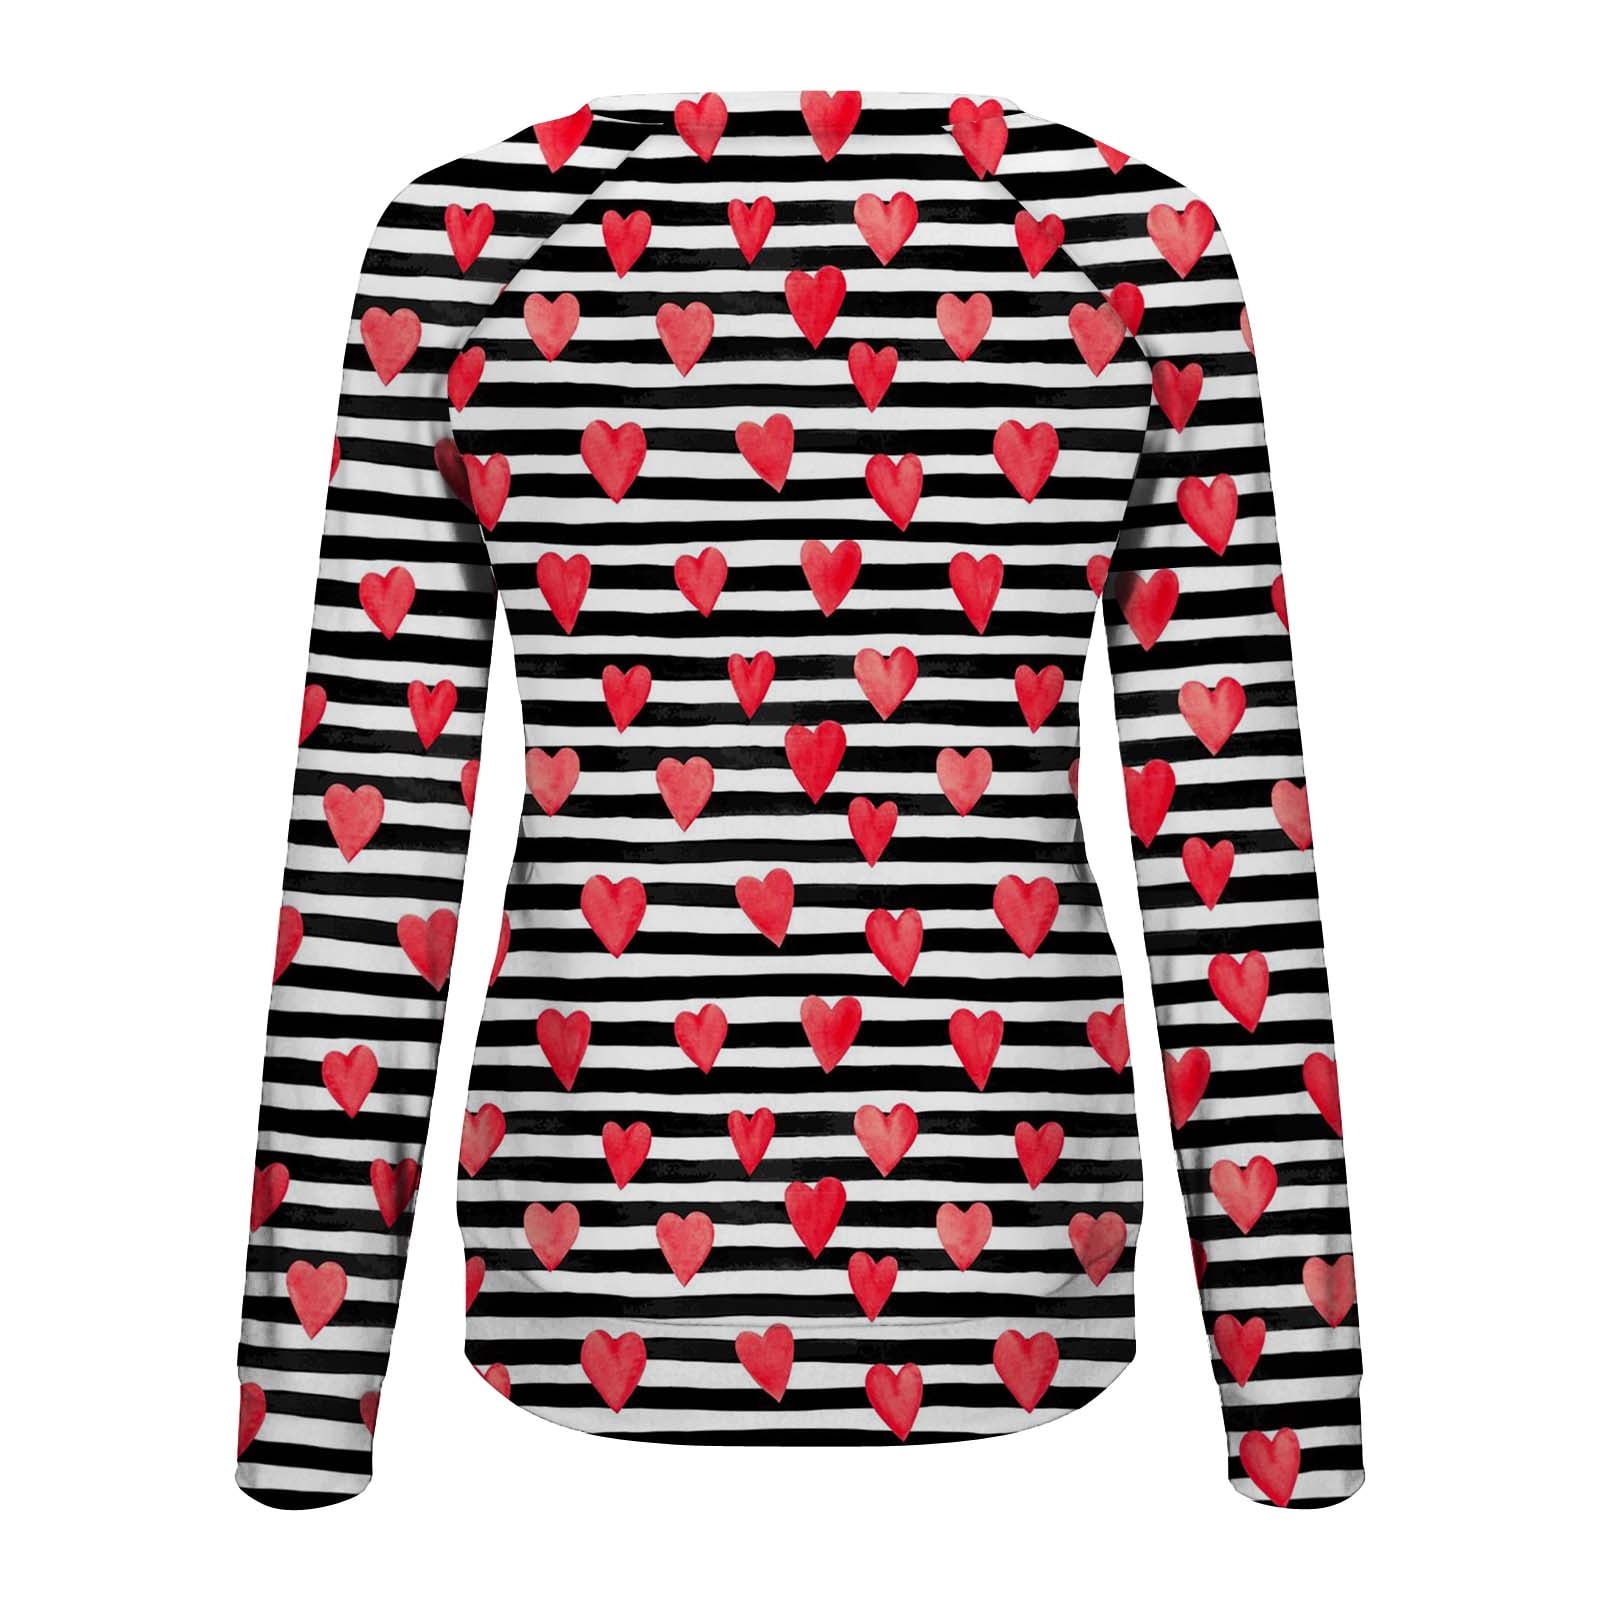 RQYYD Women Stripe Love Heart Graphic Sweatshirt Happy Valentine's Day  Pullover Tops Casual Loose Long Sleeve Crewneck Shirts Red XL